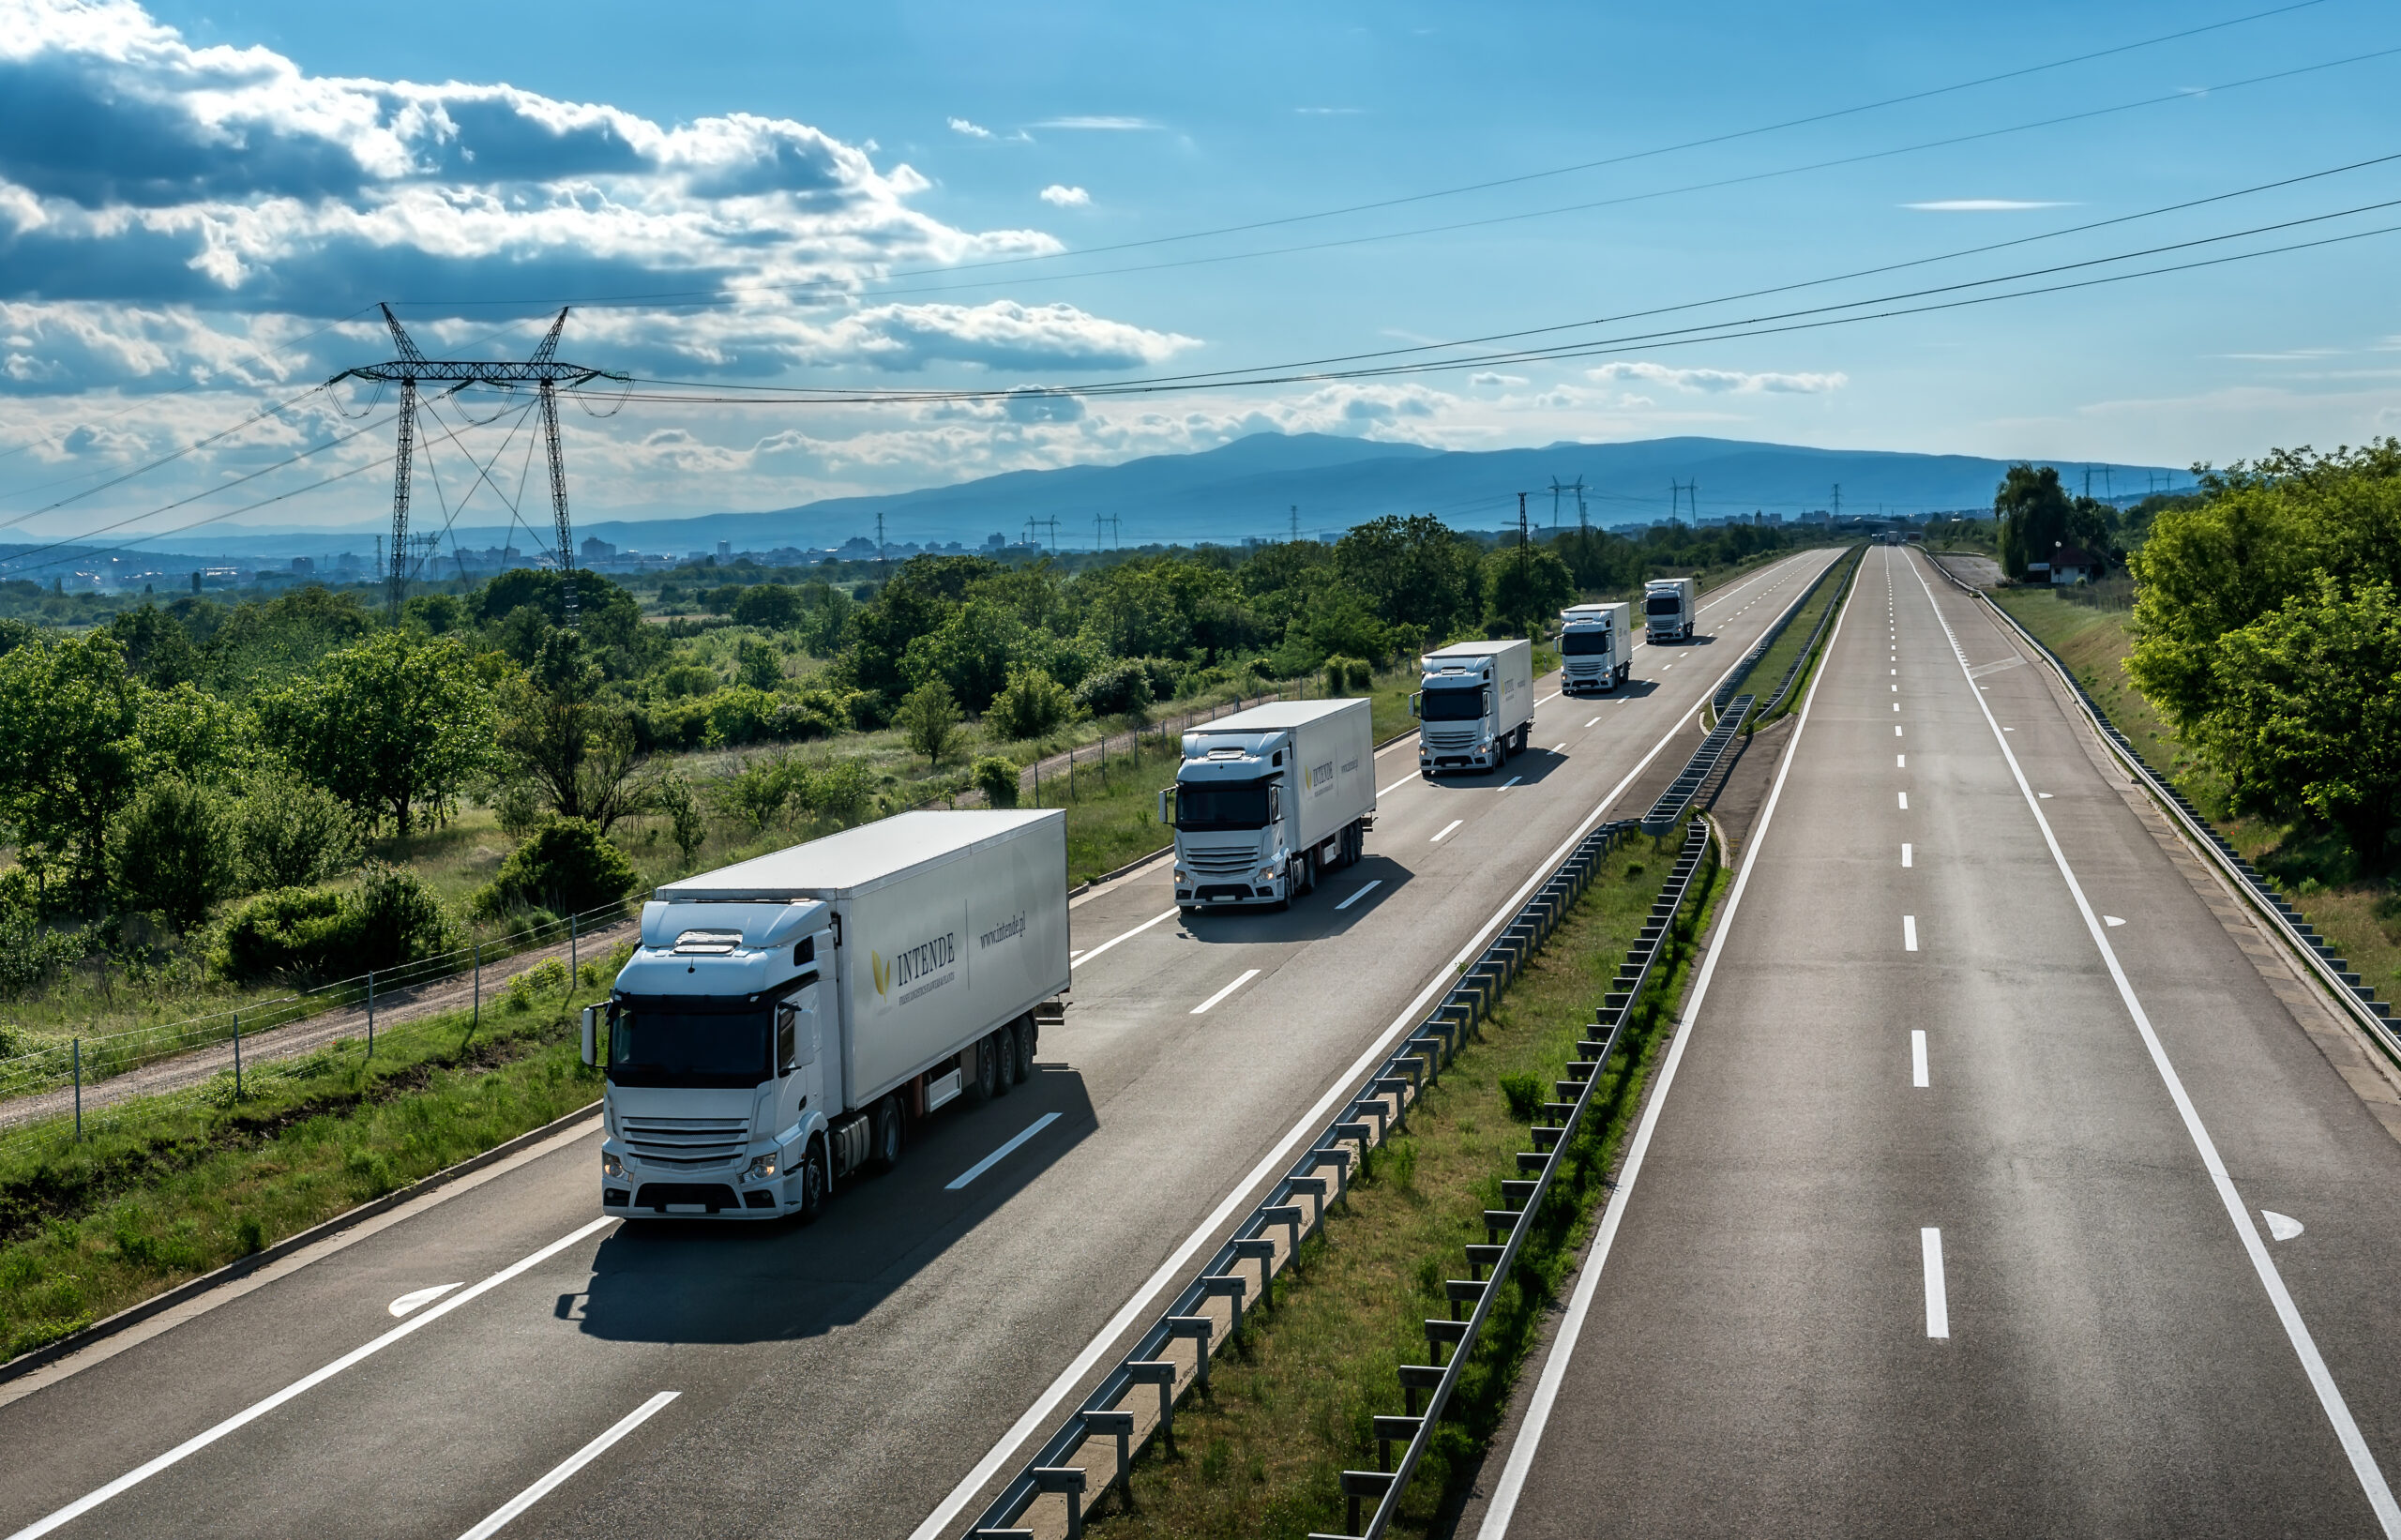 Fleet or Convoy of big transportation trucks in line  on a countryside highway under a blue sky